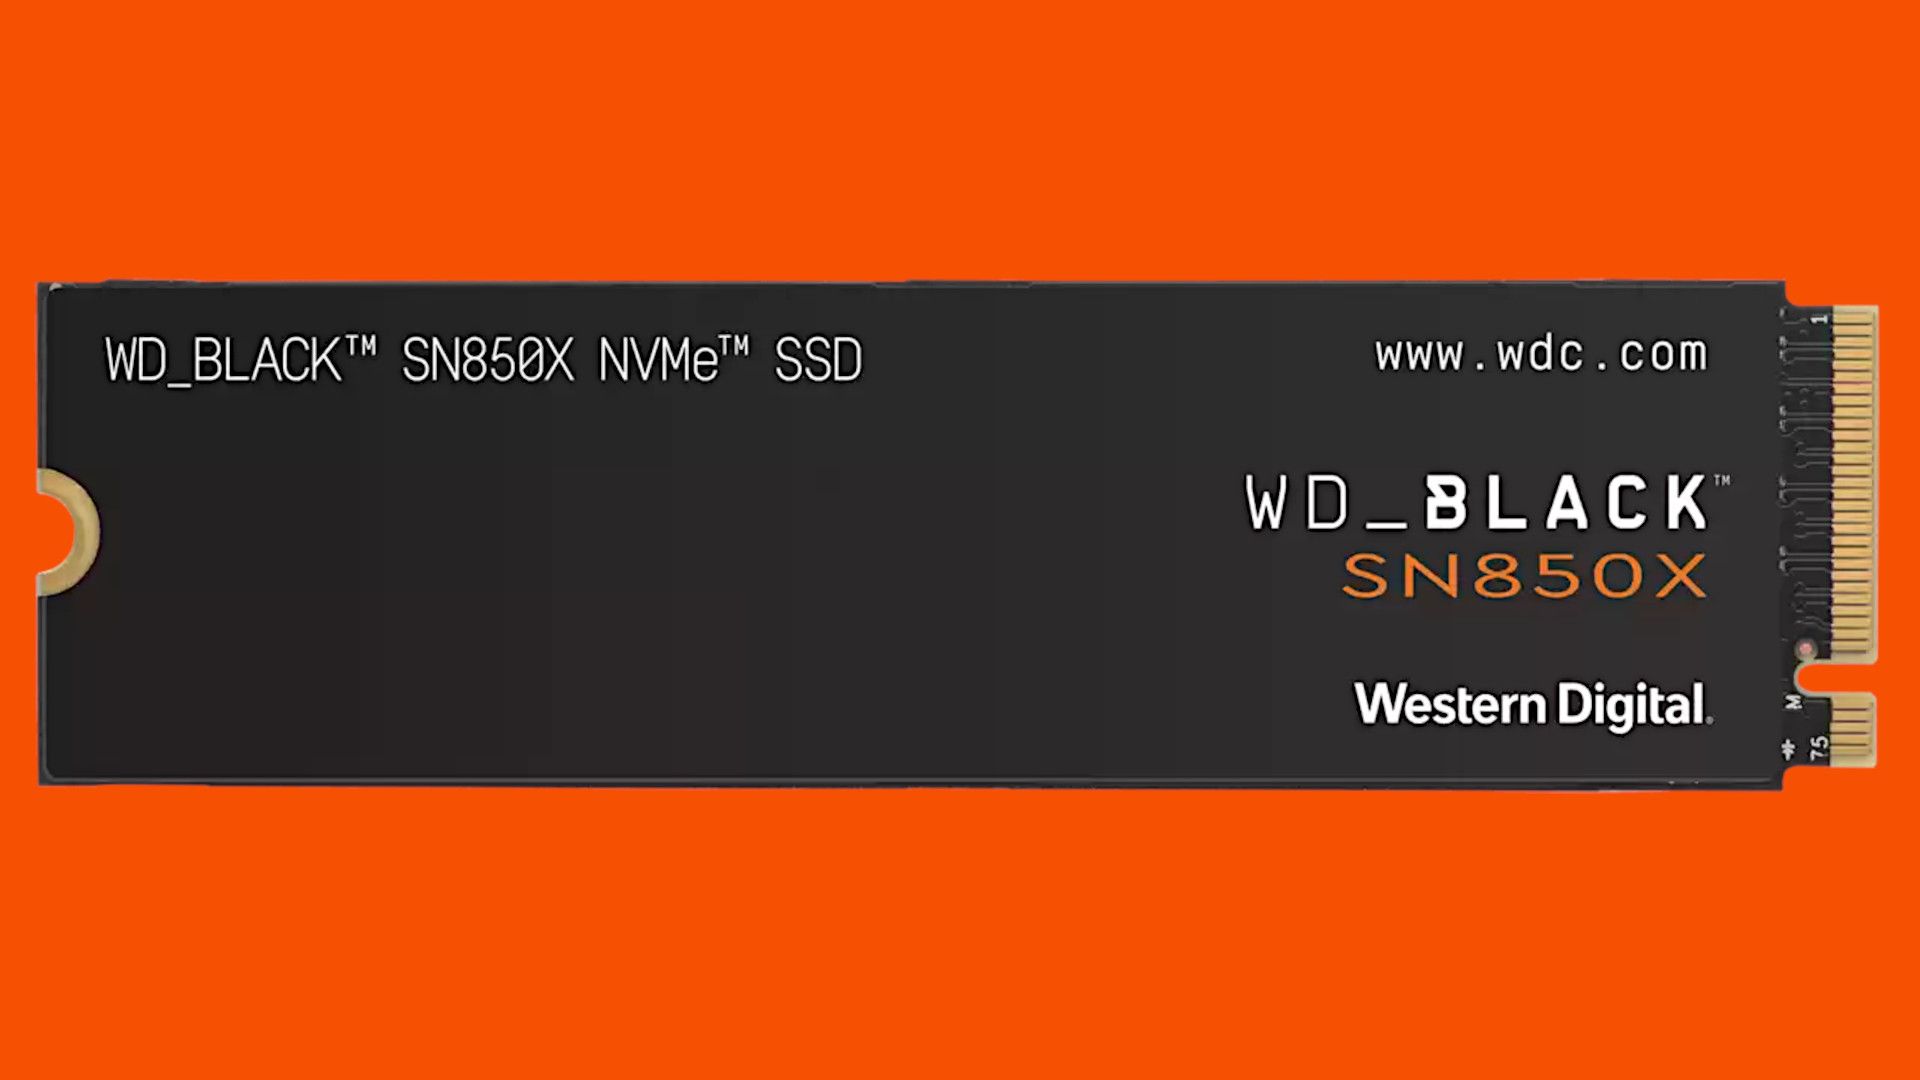 WD_BLACK SN850X SSD is back to its lowest ever price on Amazon